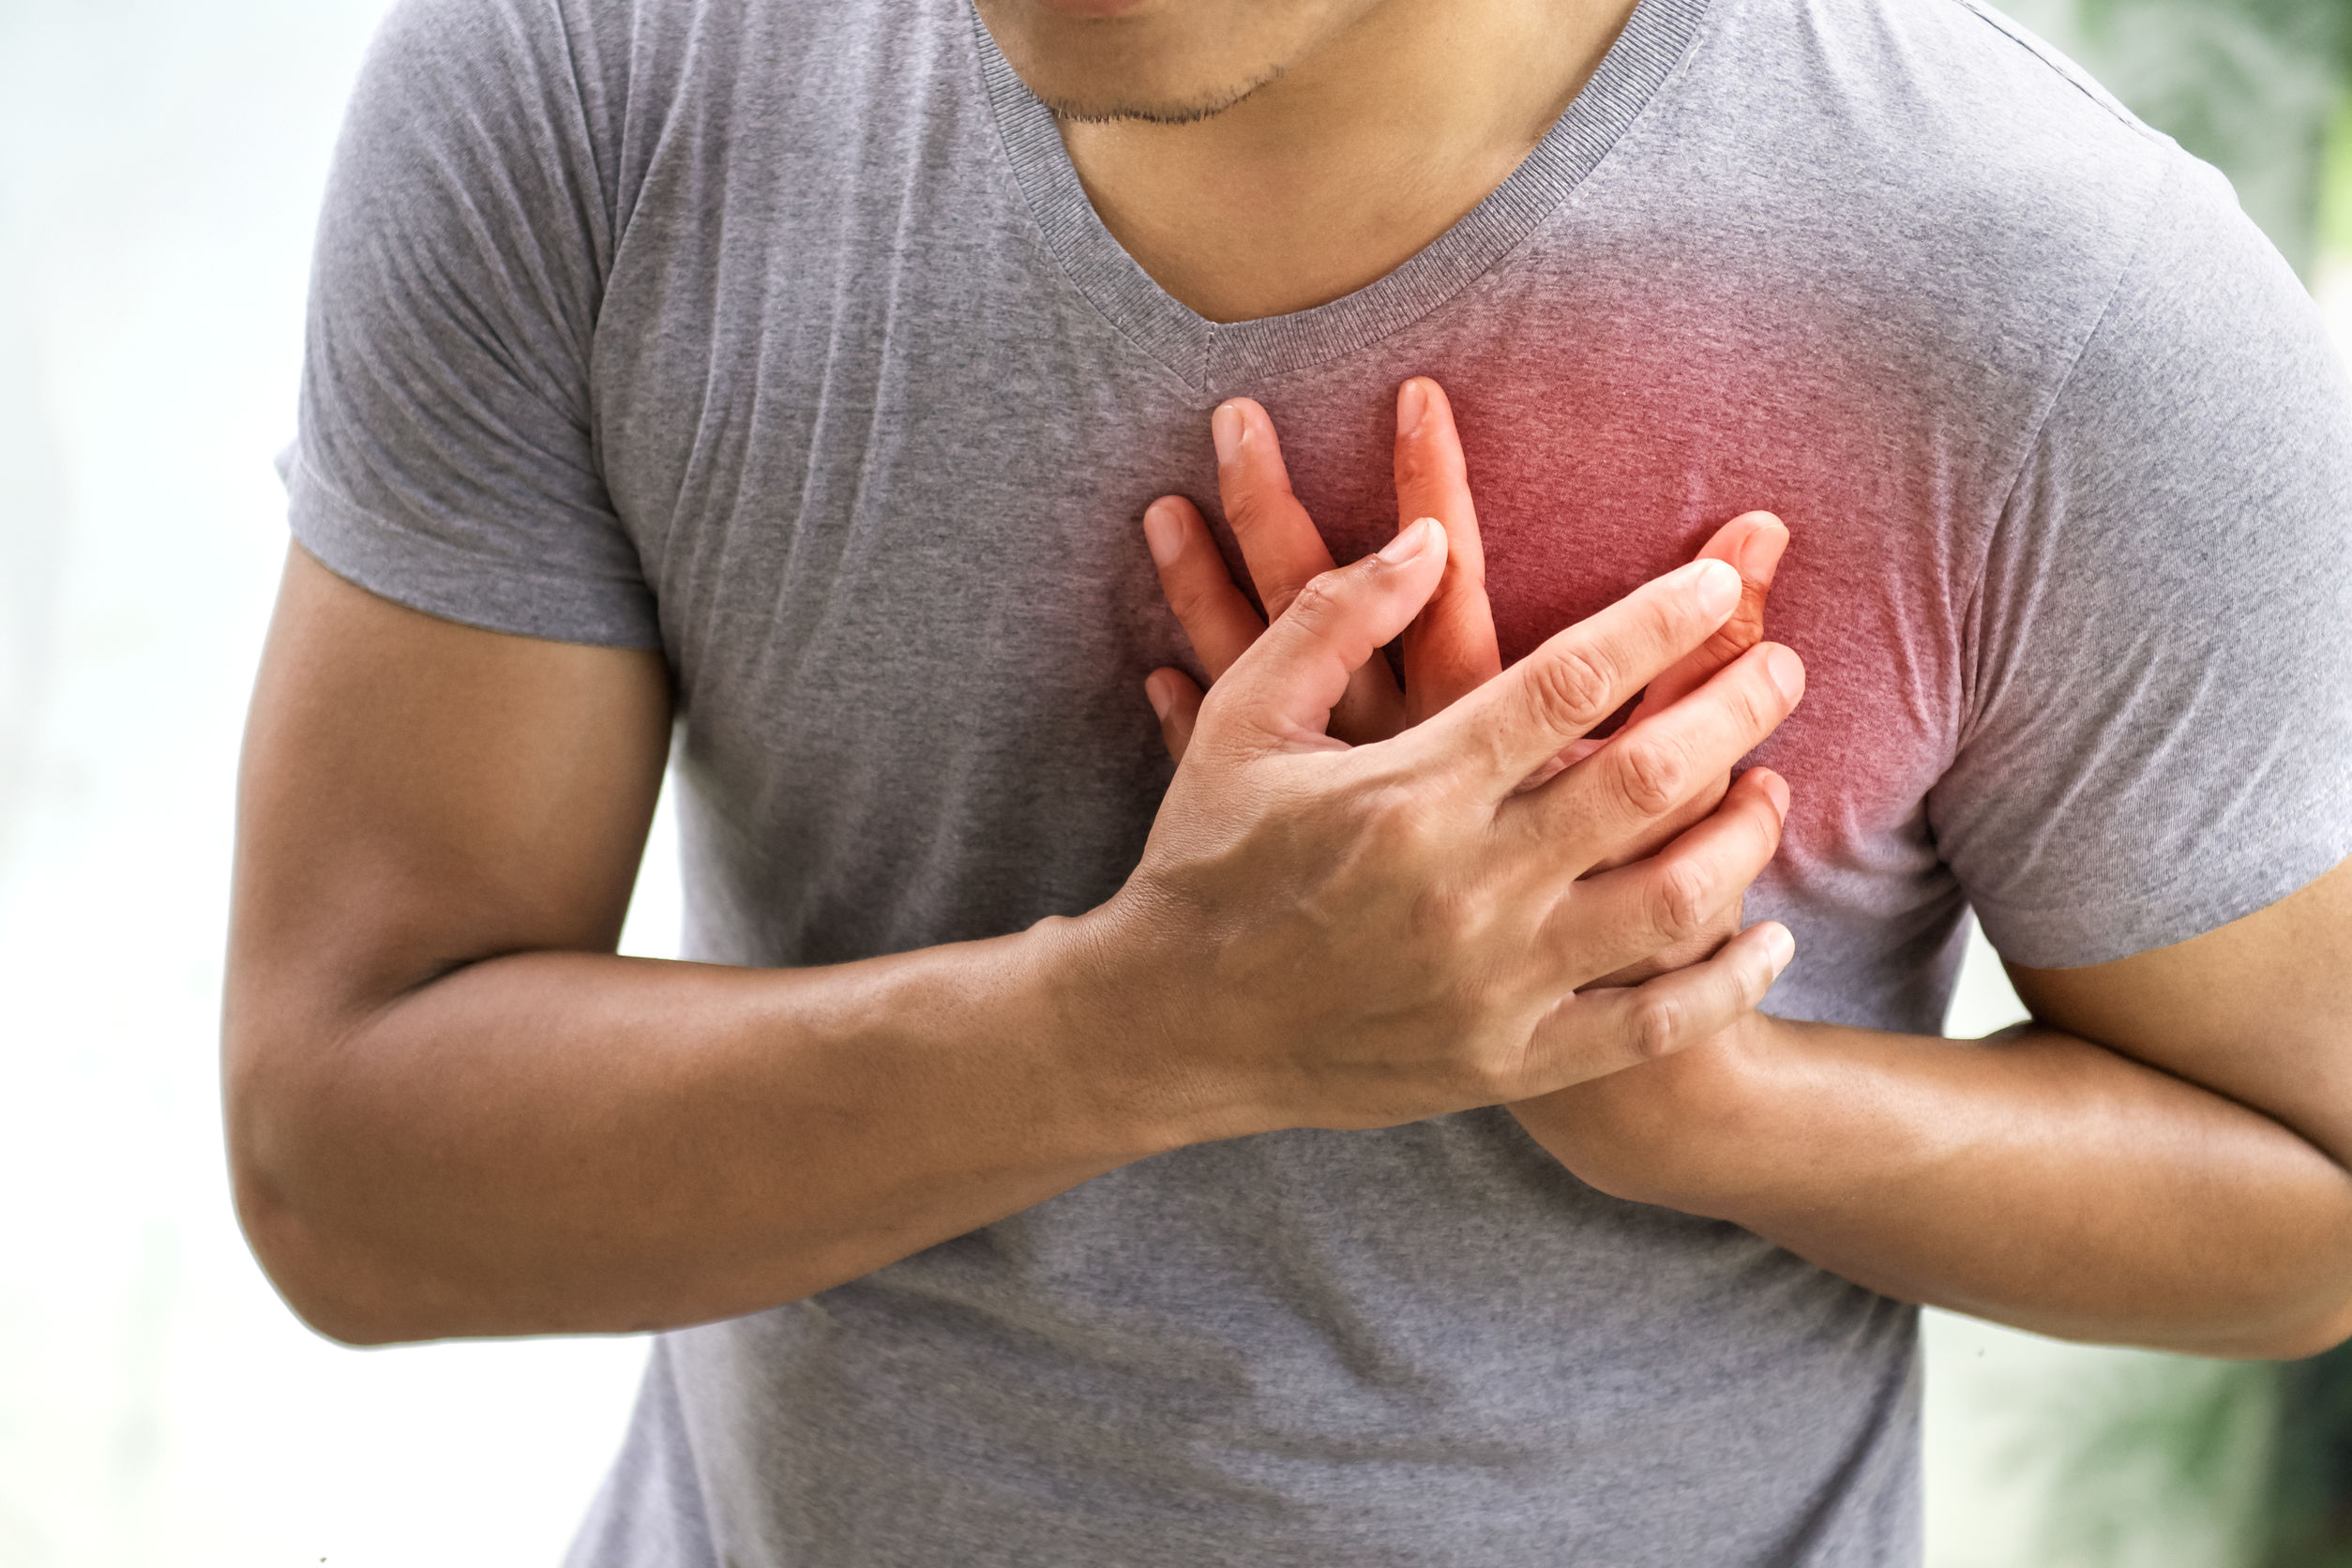 Feeling of burning chest can be sign of a heart attack